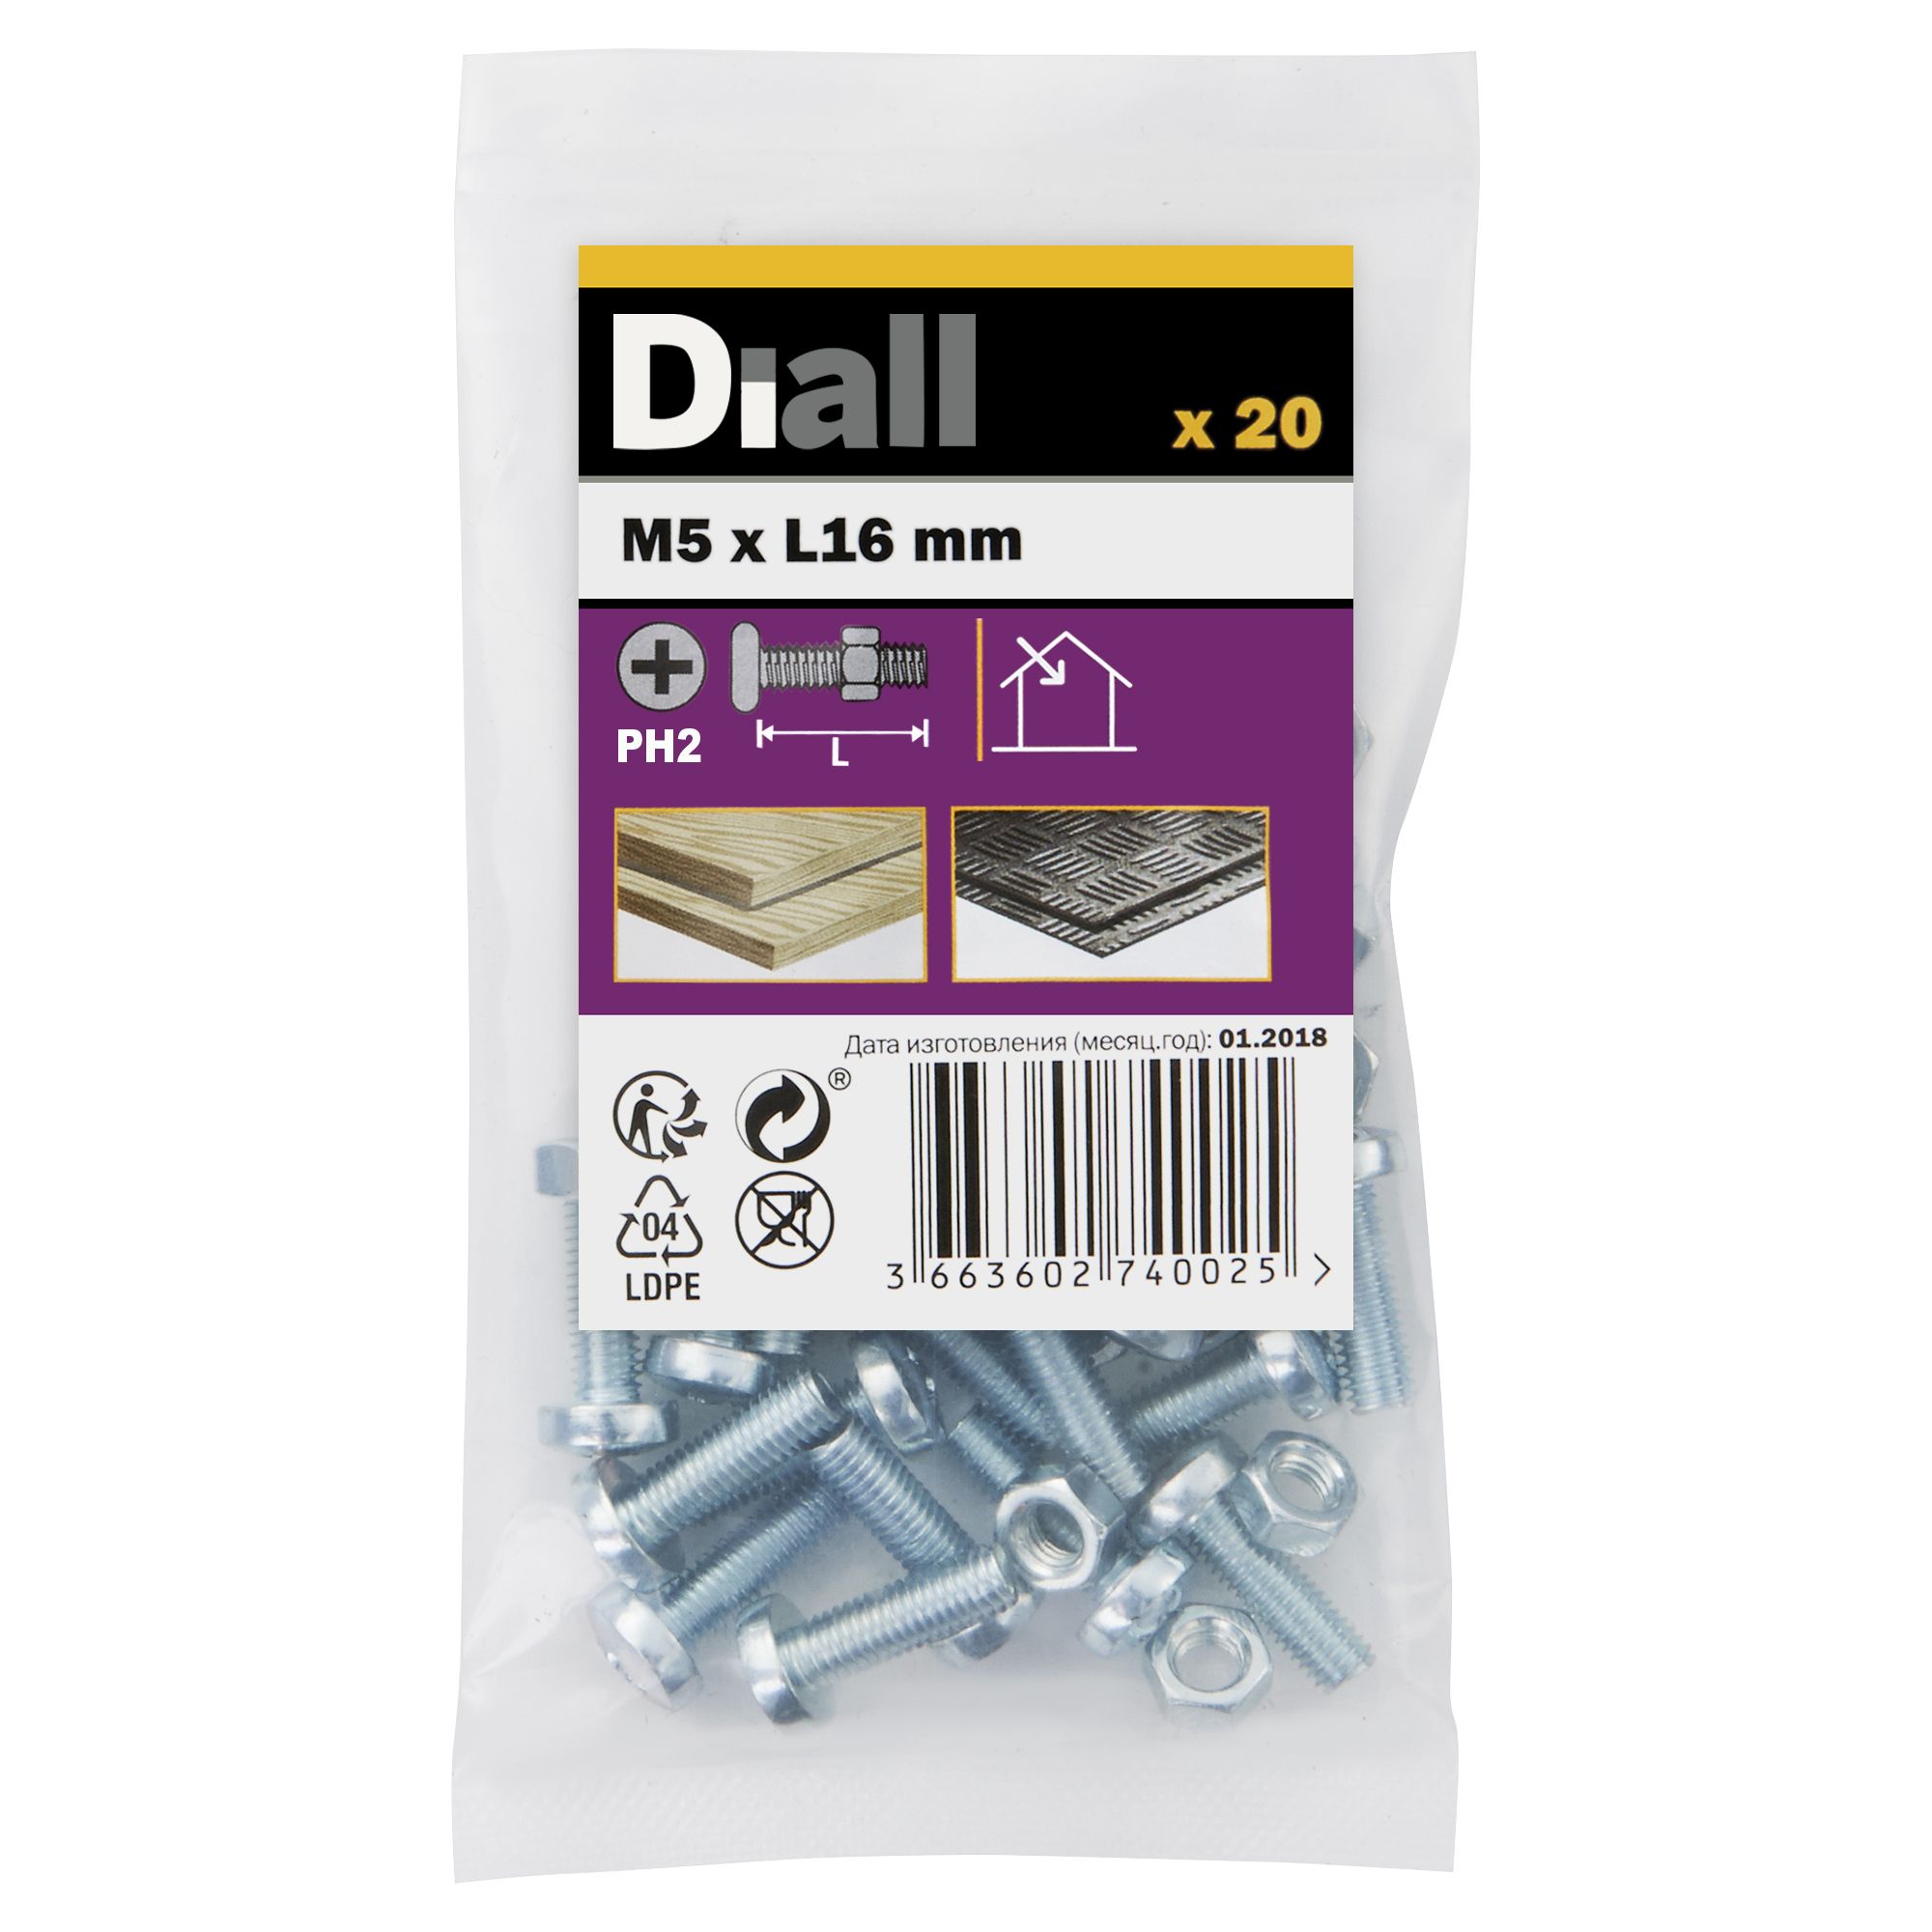 Diall M5 Cruciform Philips Pan head Zinc-plated Carbon steel Machine screw & nut (Dia)5mm (L)16mm, Pack of 20